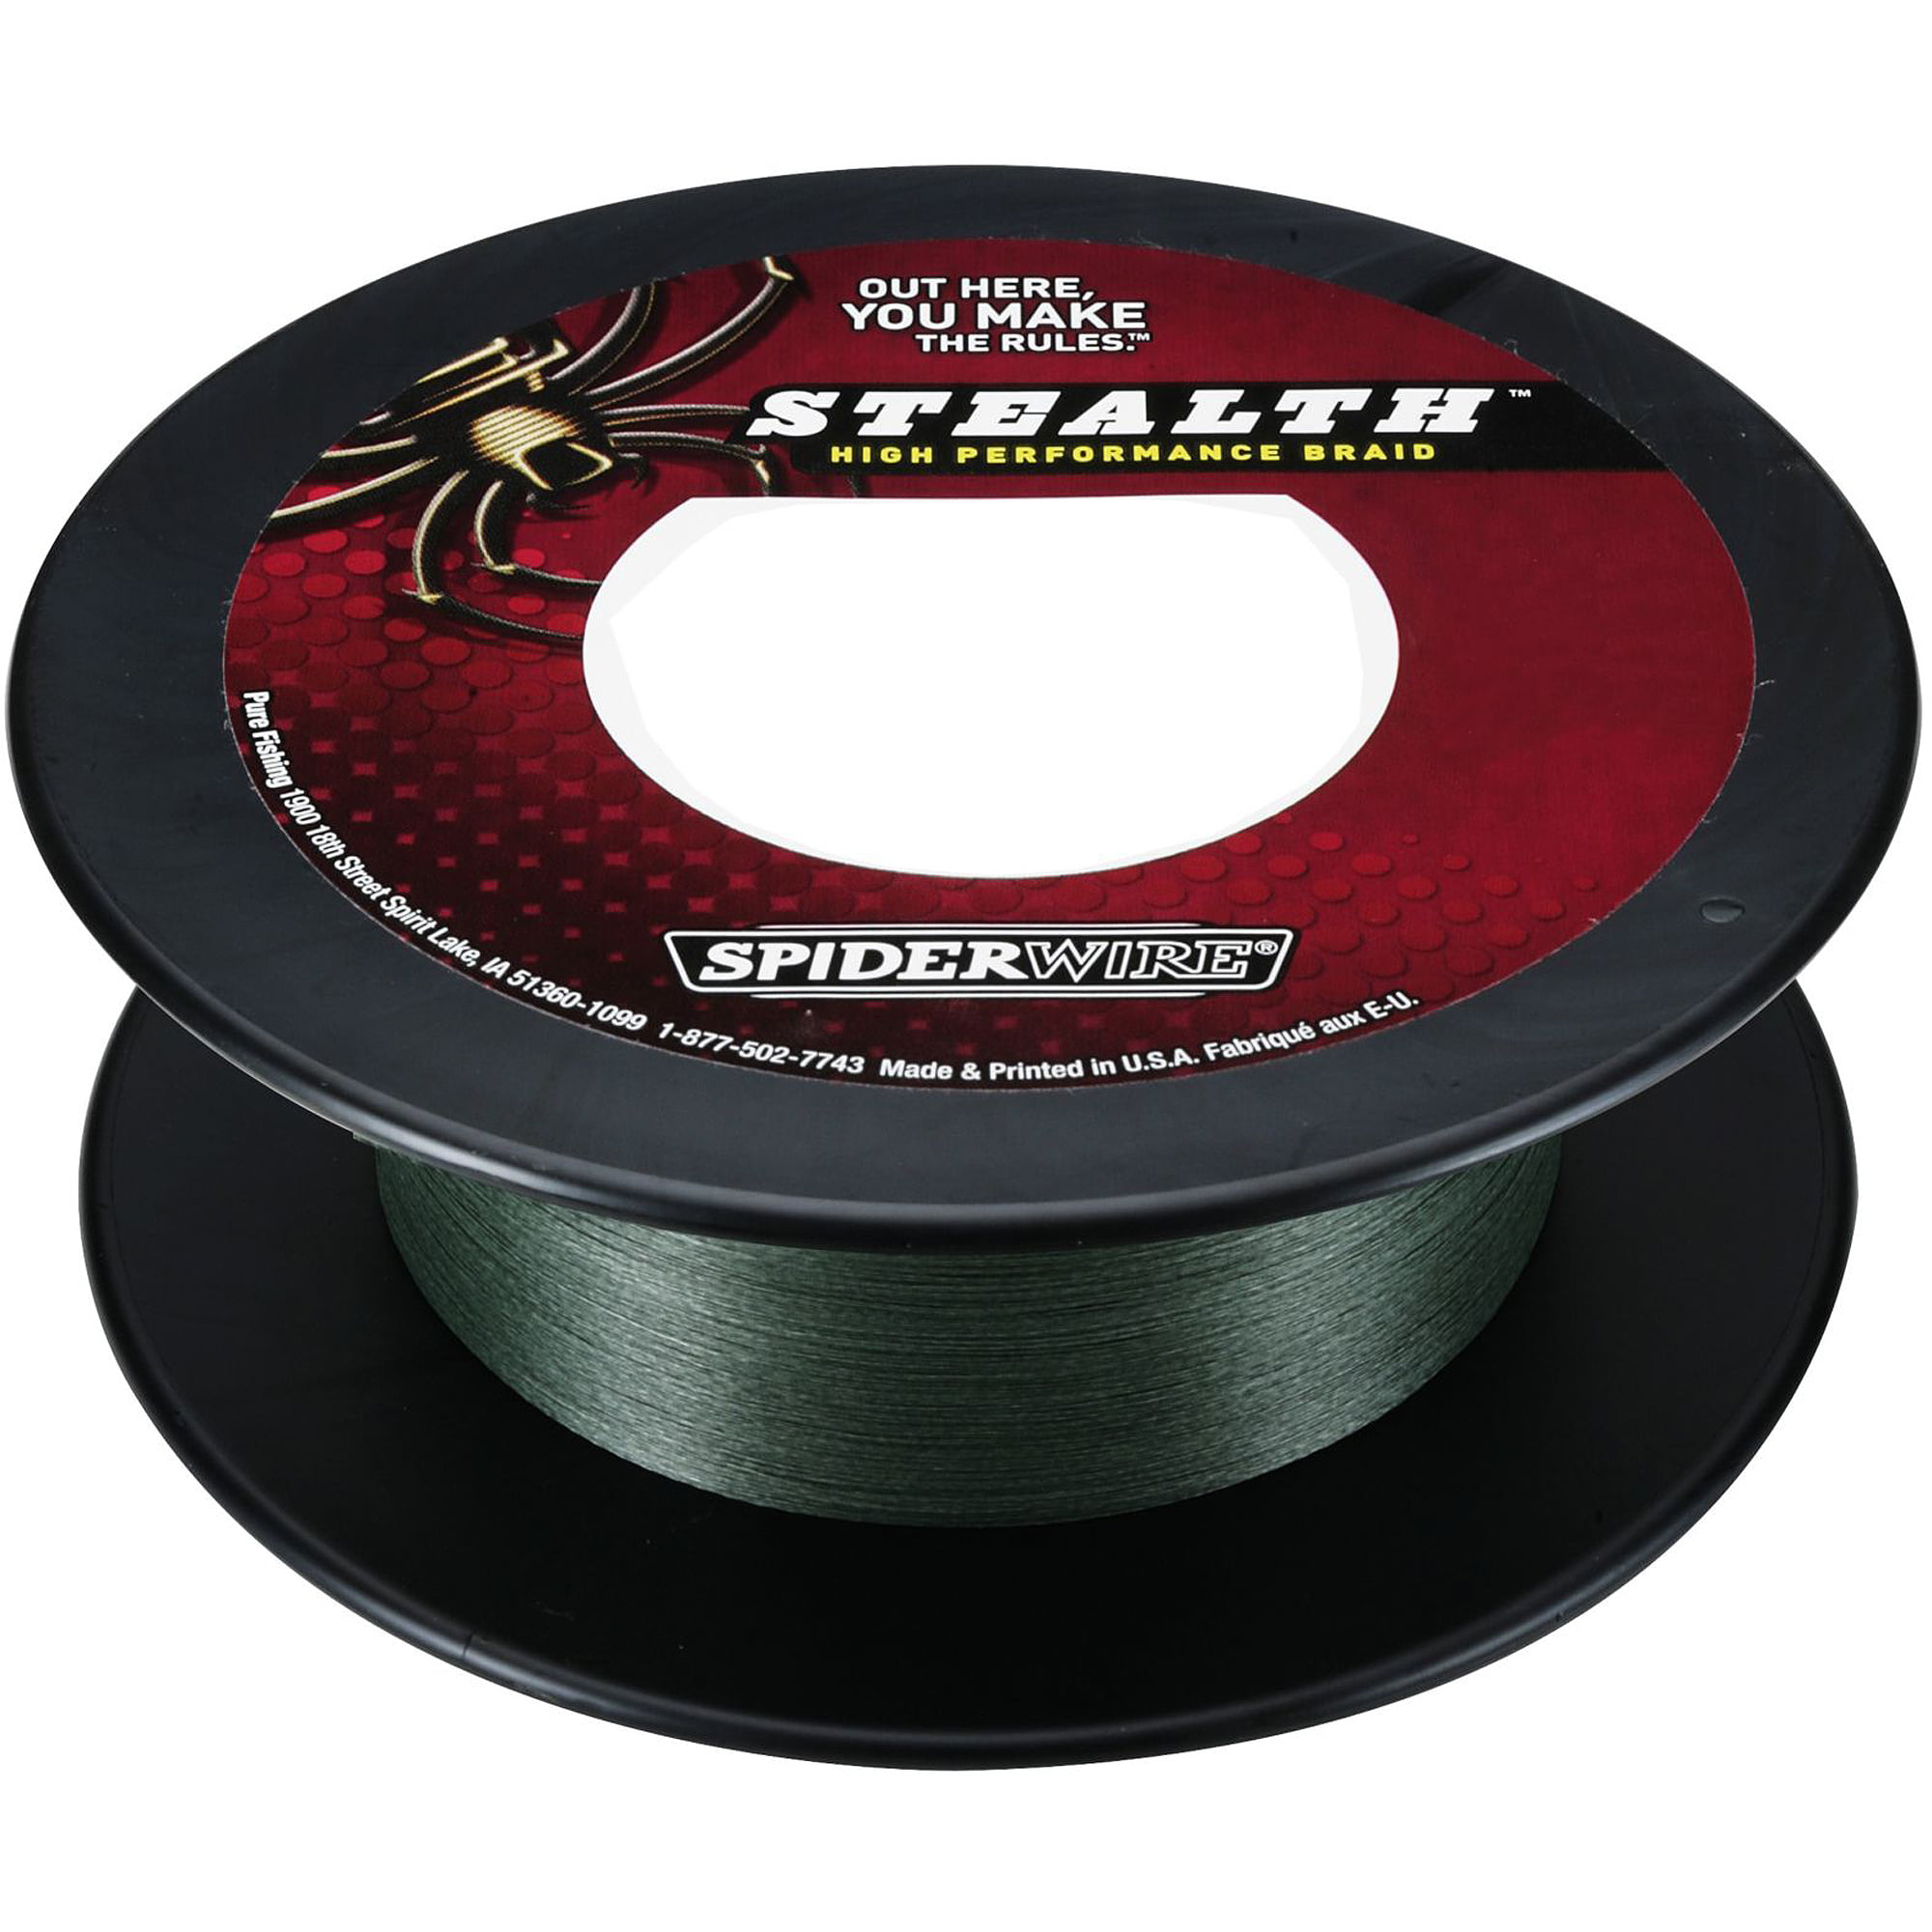 Spiderwire Stealth Braid Fishing Line (500 yds) - 40 lb Test - Moss Green 